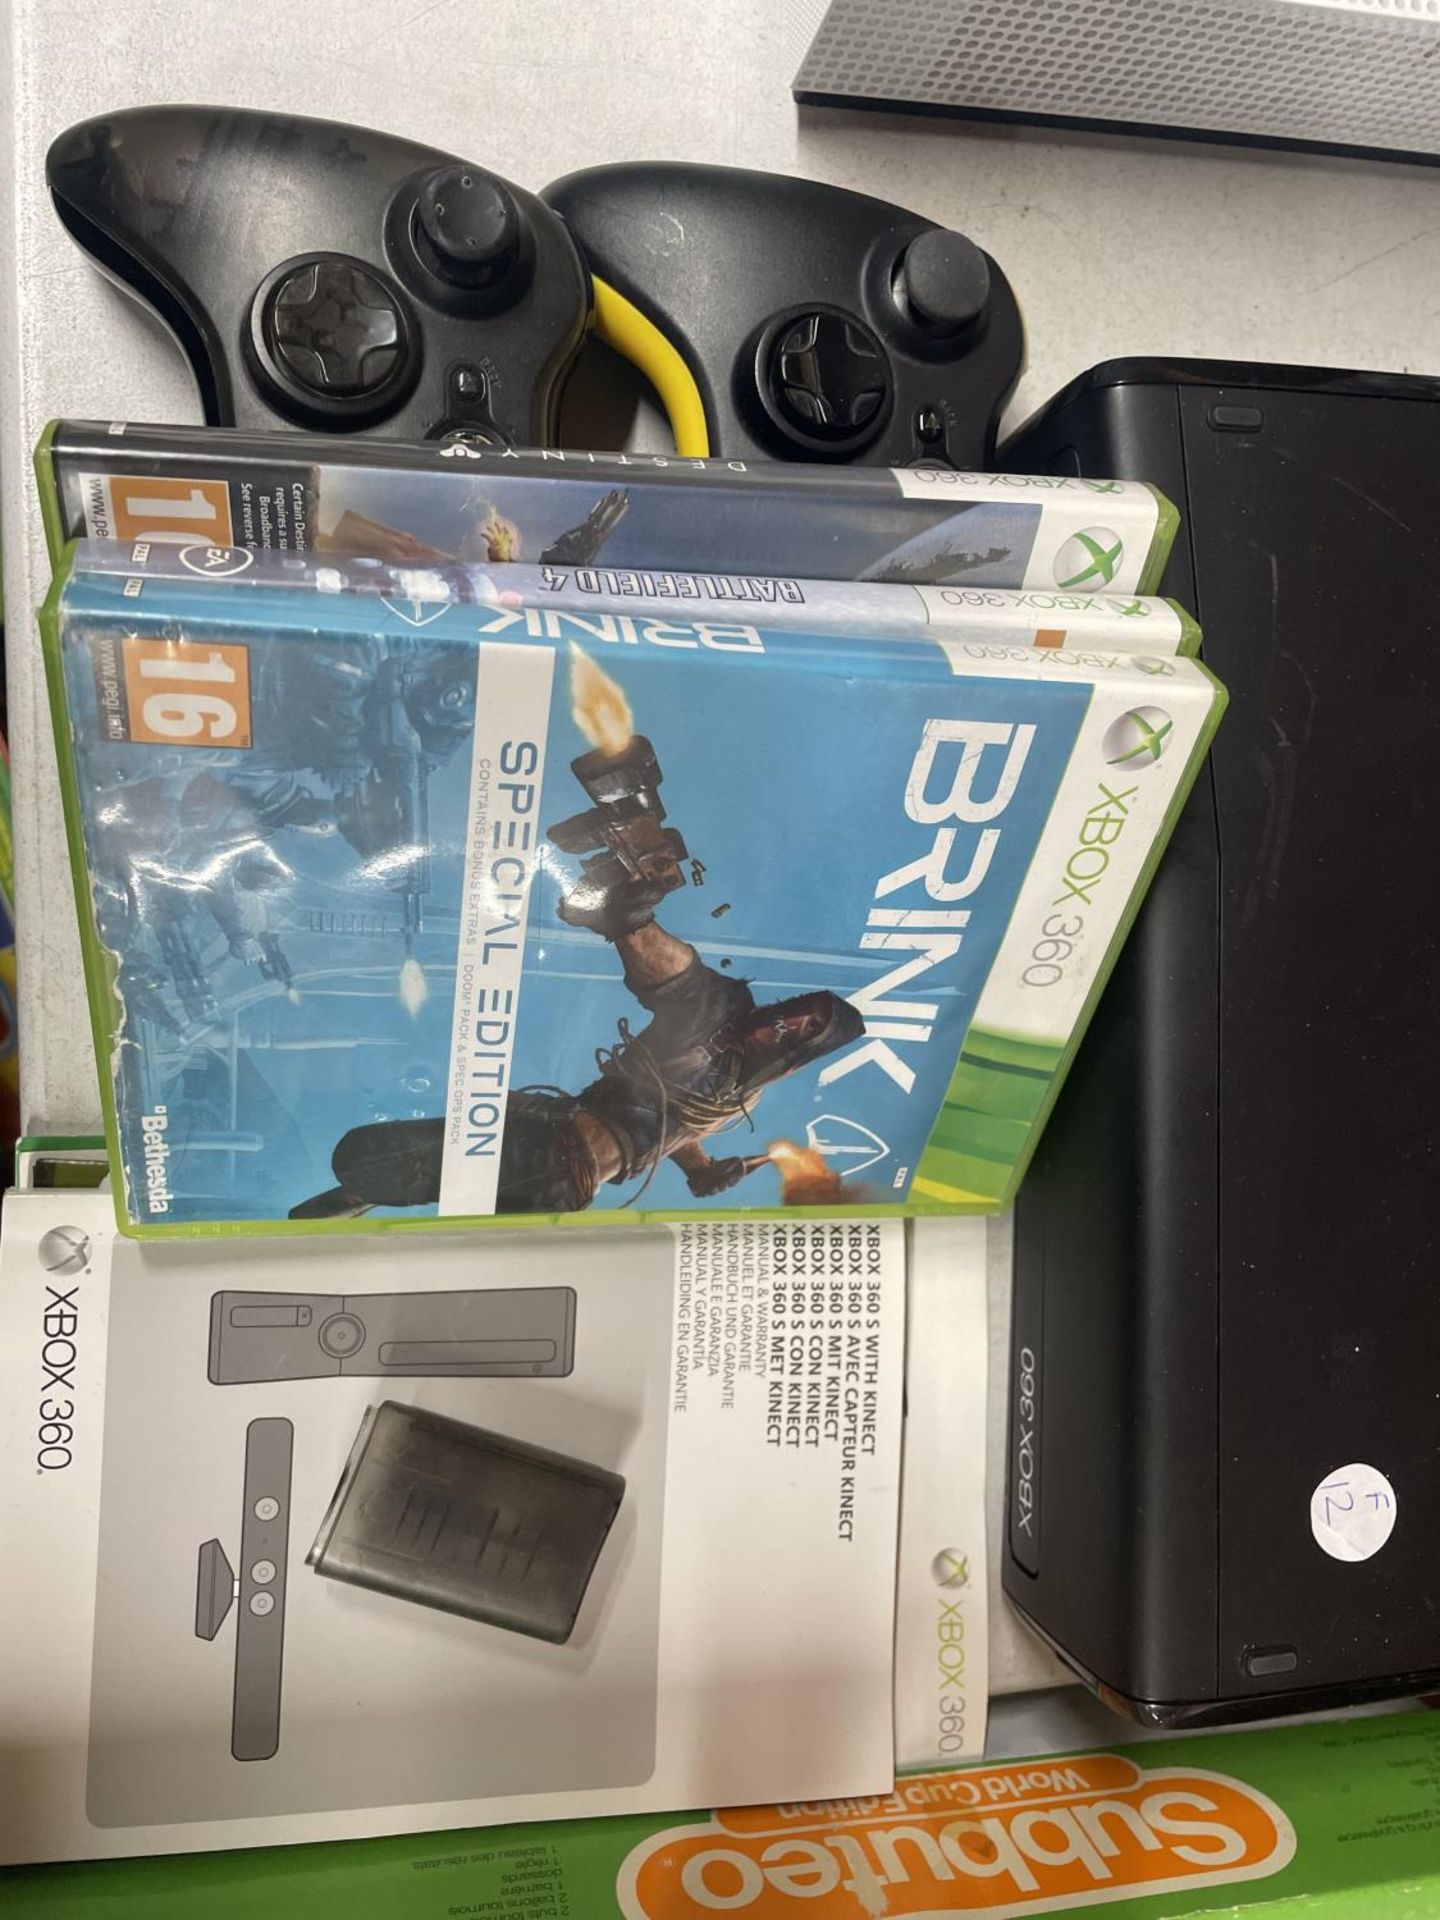 AN X-BOX 360 GAMES CONSOLE WITH TWO CONTROLLERS , WIRES AND 3 GAMES, BRINK, DESTINY AND - Image 2 of 4